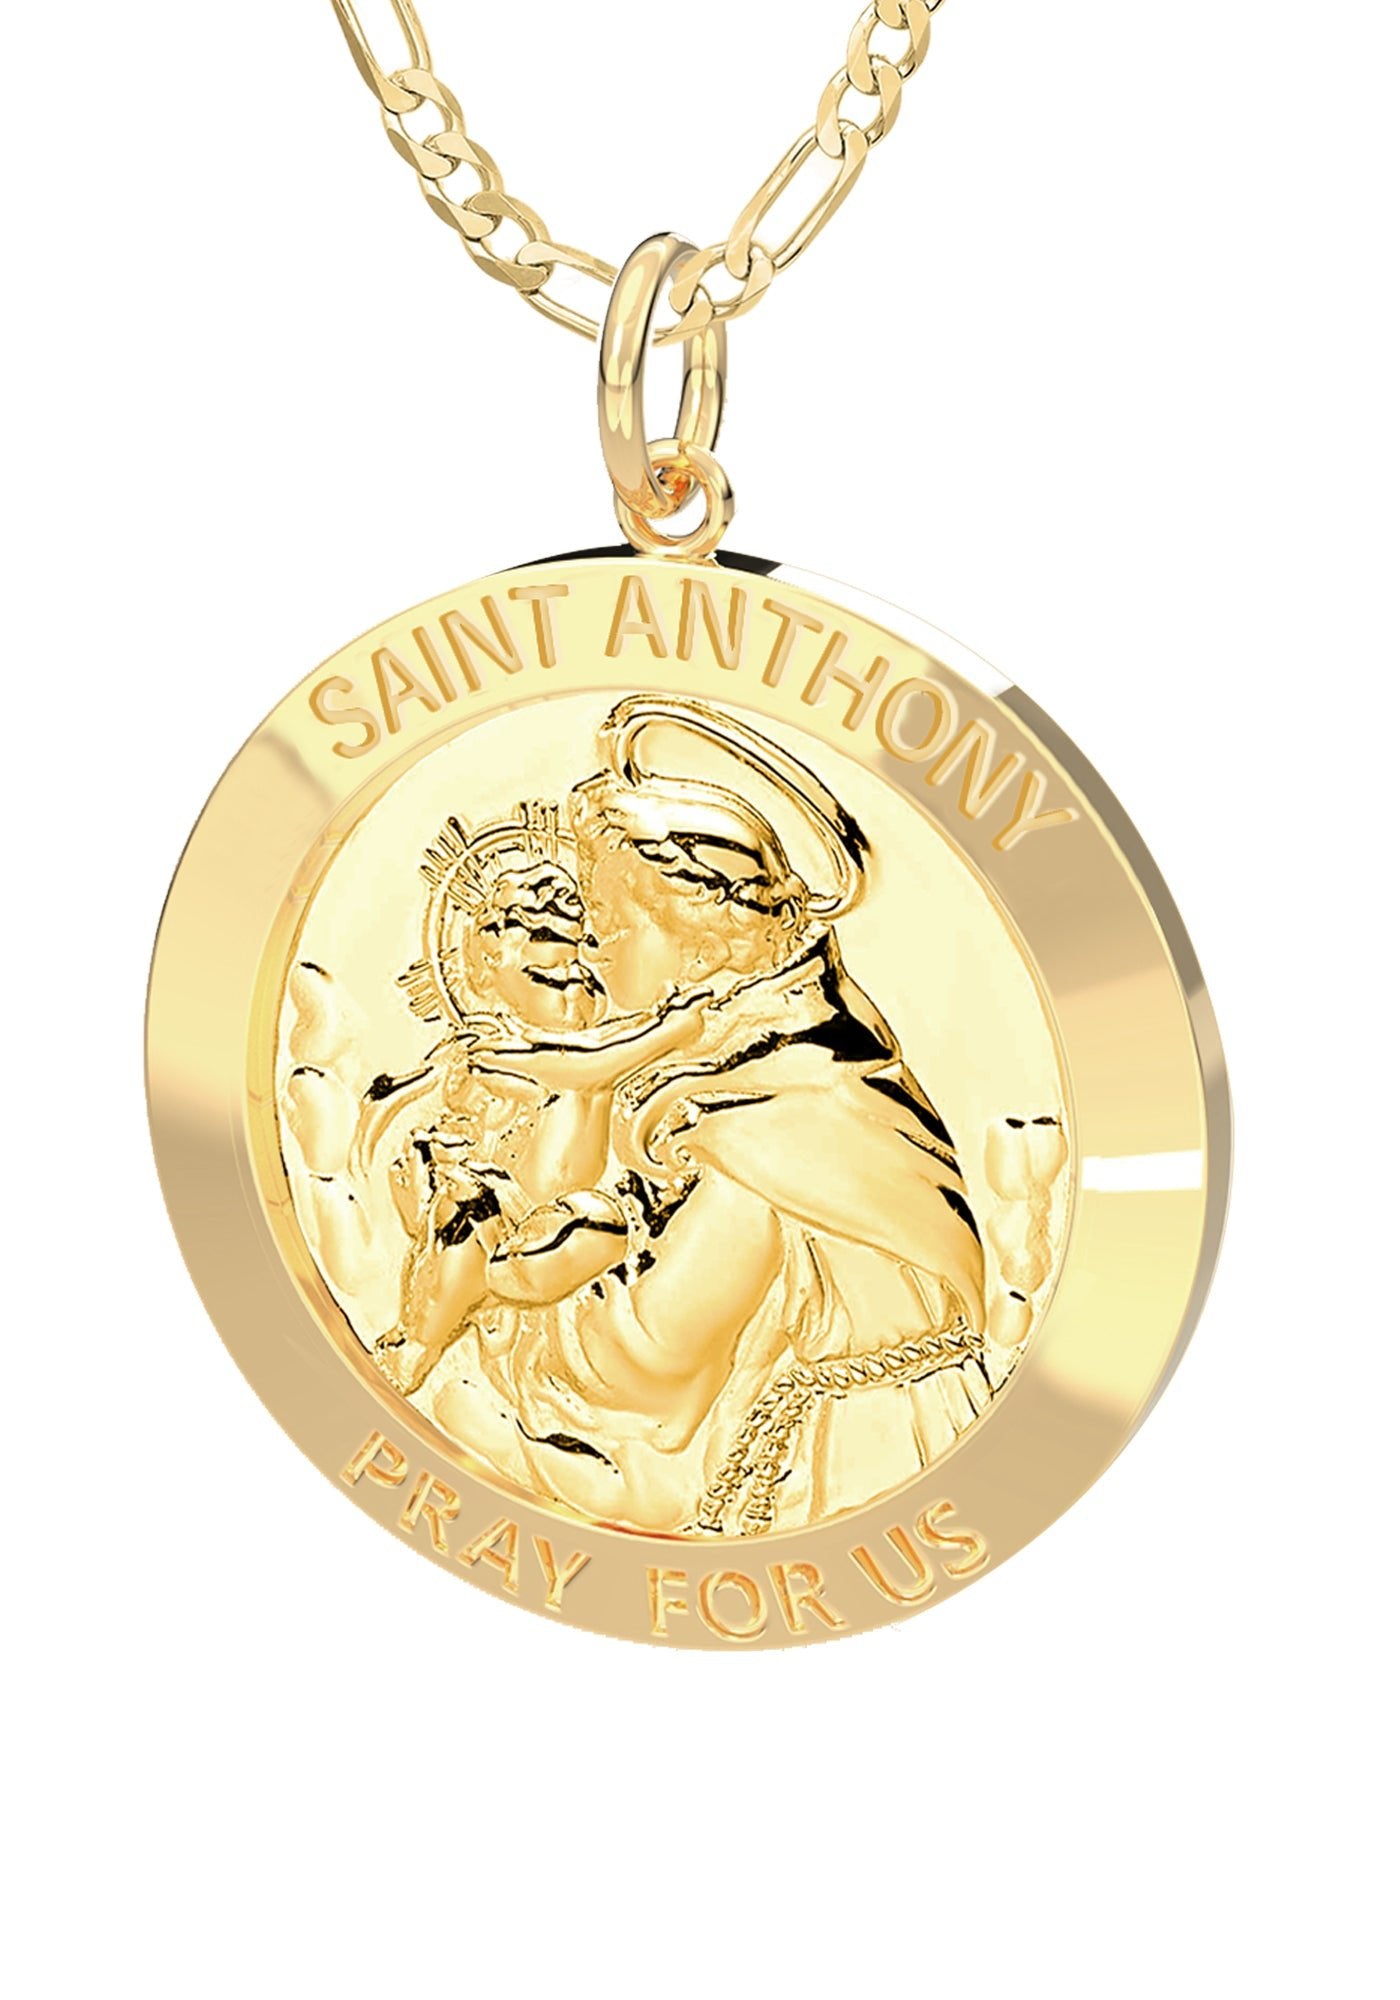 Petite Ladies 14K Yellow Gold Solid Saint Anthony Medal Pendant Necklace, 18mm - US Jewels